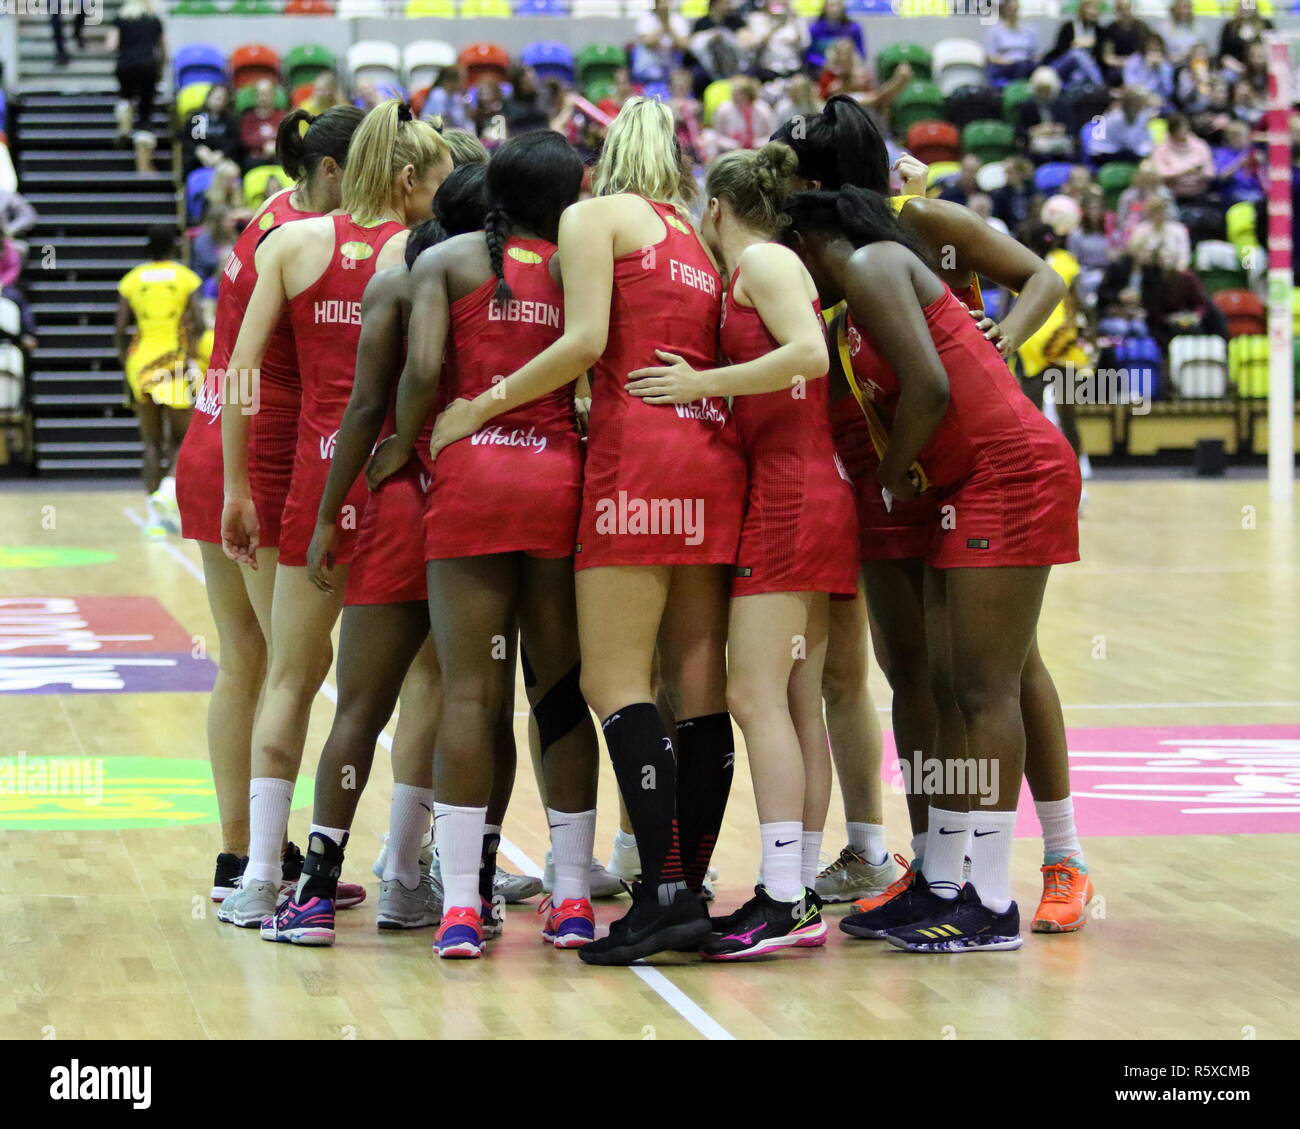 LONDON, UK. 2nd Dec, 2018. Englands Vitality Roses Squad group on court ahead of the Vitality Netball International Series match between England and Uganda at the Copper Box Arena on December 2, 2018 in London, England, UK Credit: Grant Burton/Alamy Live News Stock Photo